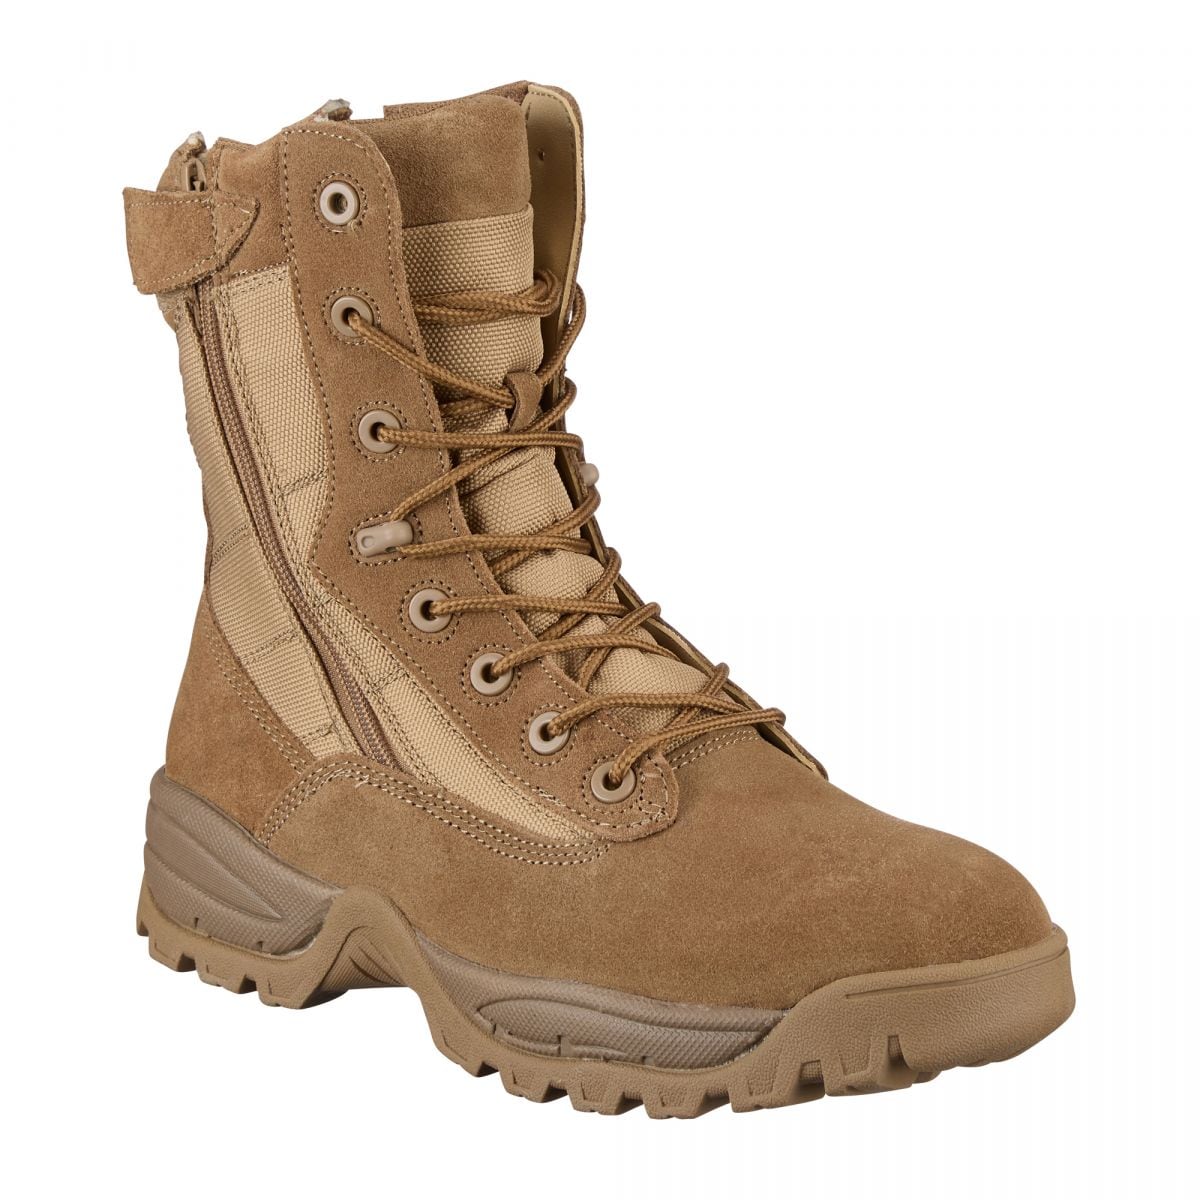 Purchase the Mil-Tec Tactical Boots Two-Zip coyote by ASMC